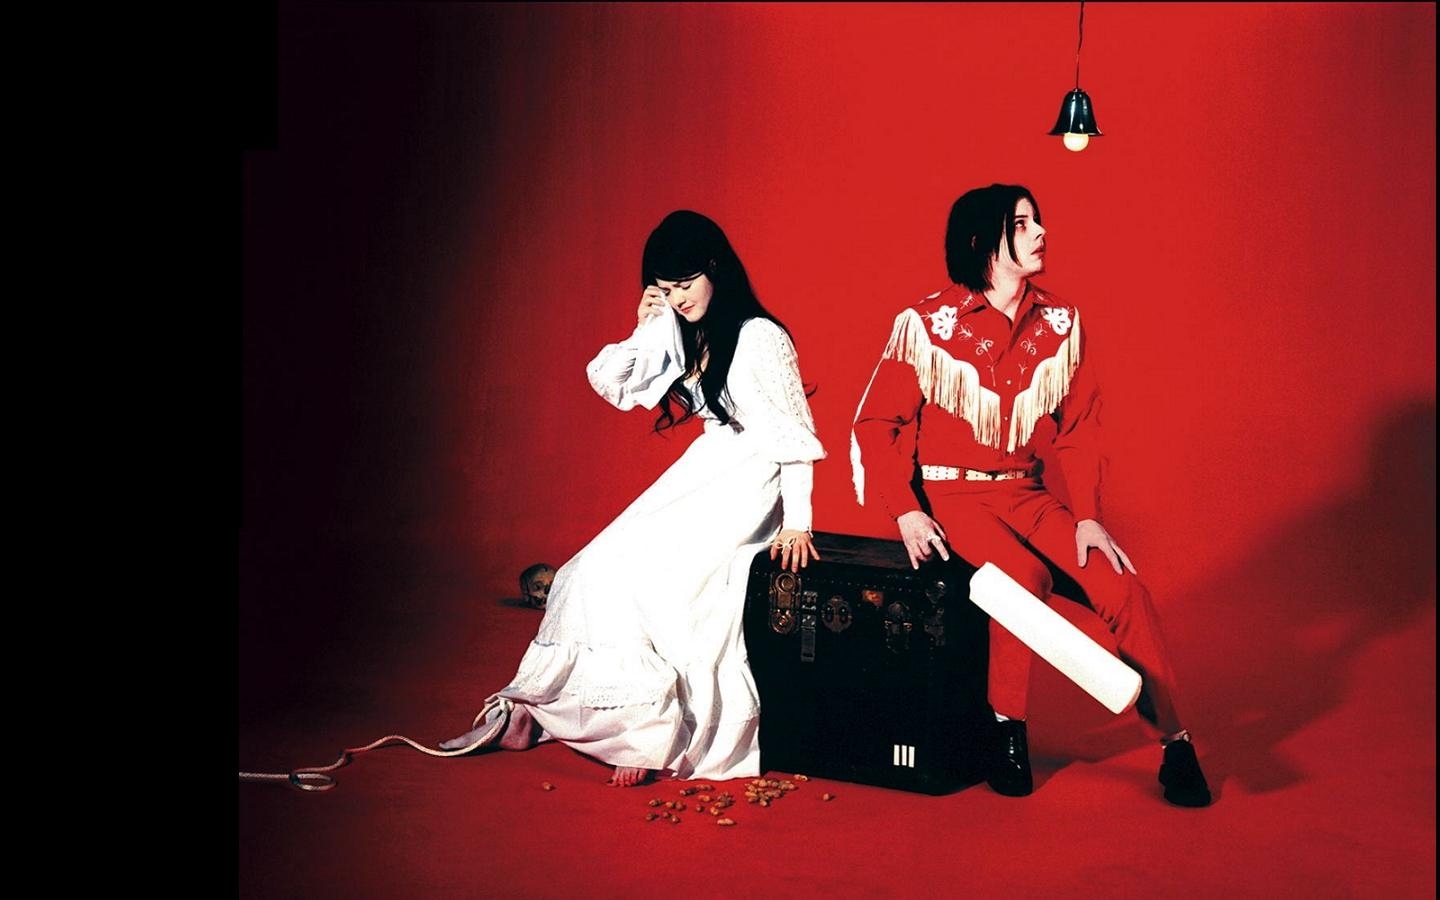 The White Stripes: Jack and Meg are brothers